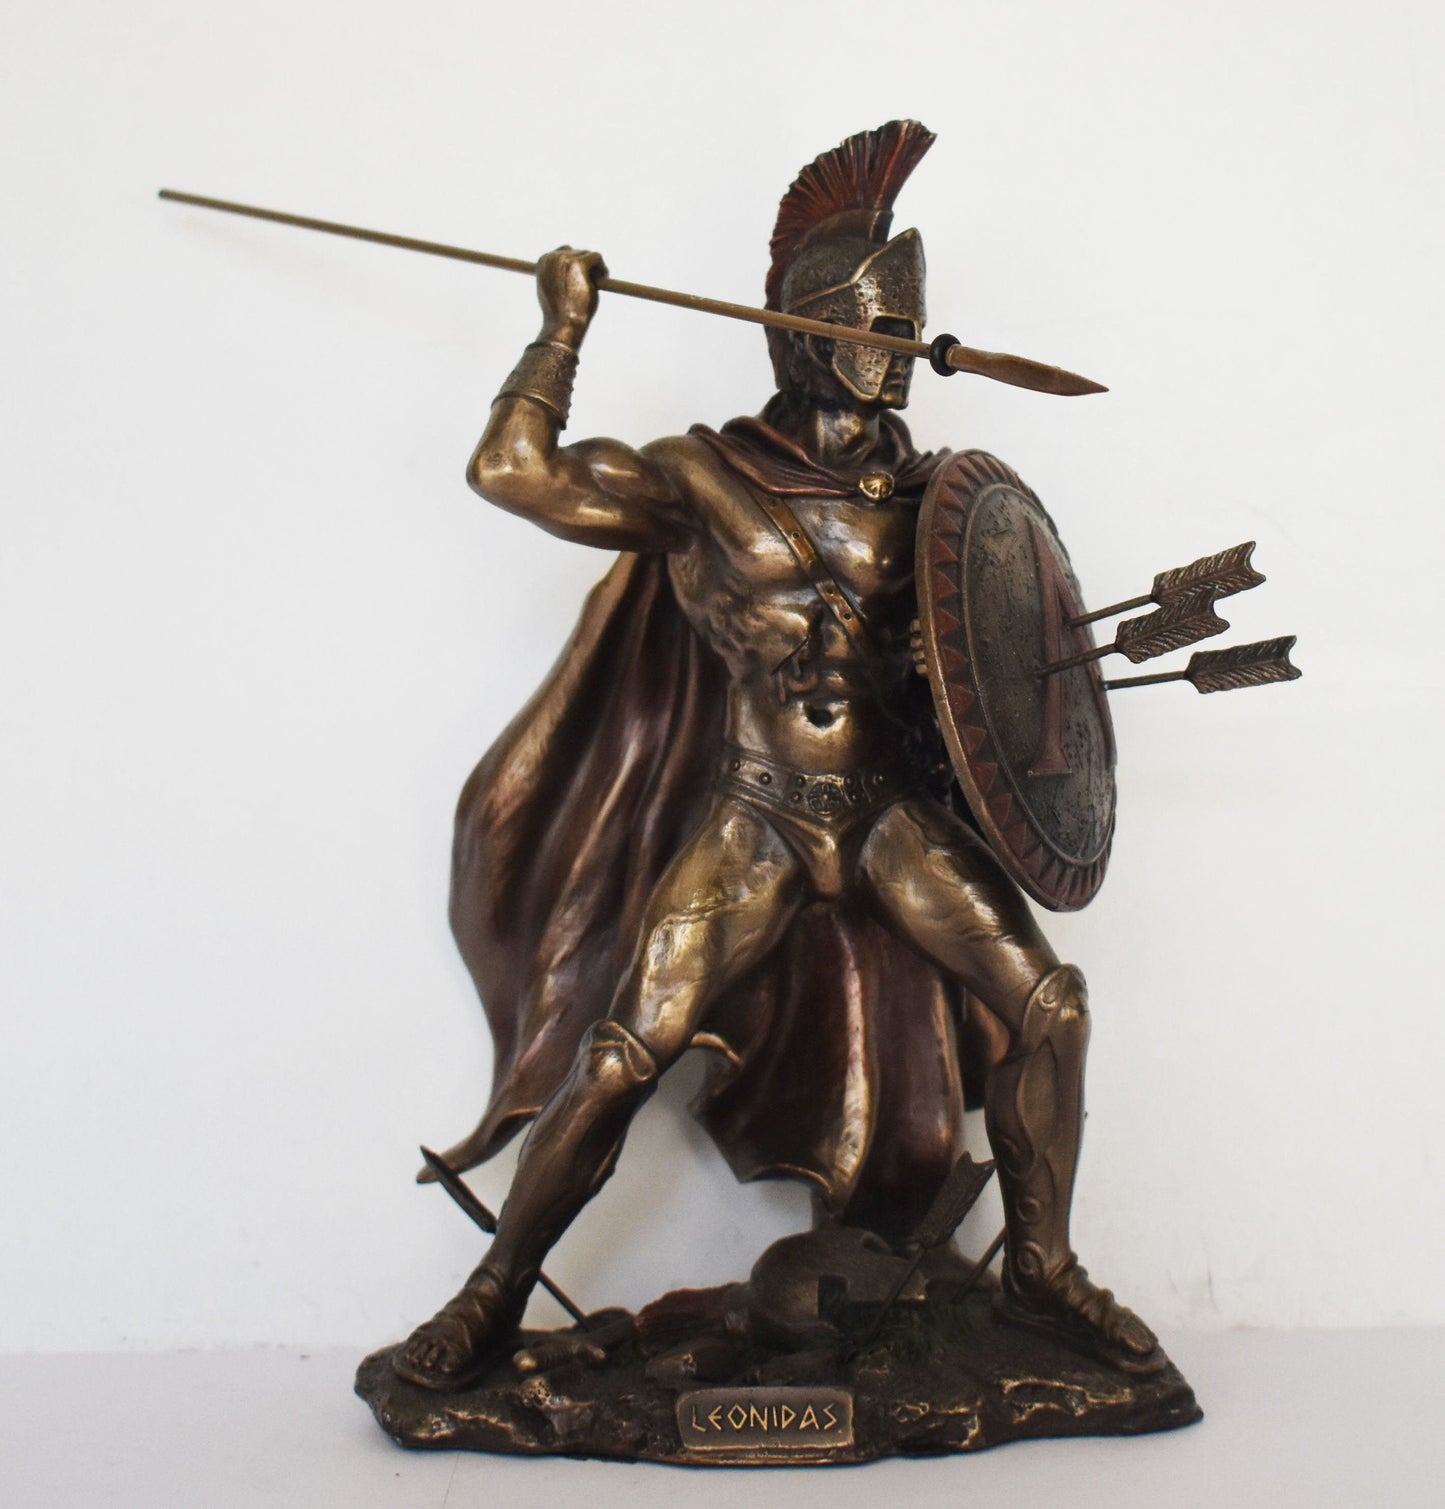 Leonidas - Spartan King - Leader of 300 - Battle of Thermopylae - 480 BC - Molon Labe, Come and Take Them - Cold Cast Bronze Resin